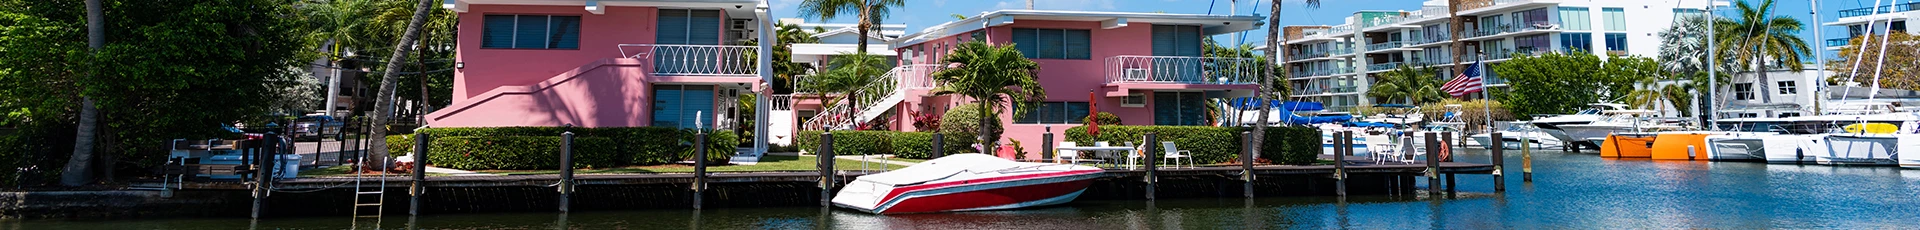 Boat Removal, Dismantle and Disposal in Biscayne Park Florida